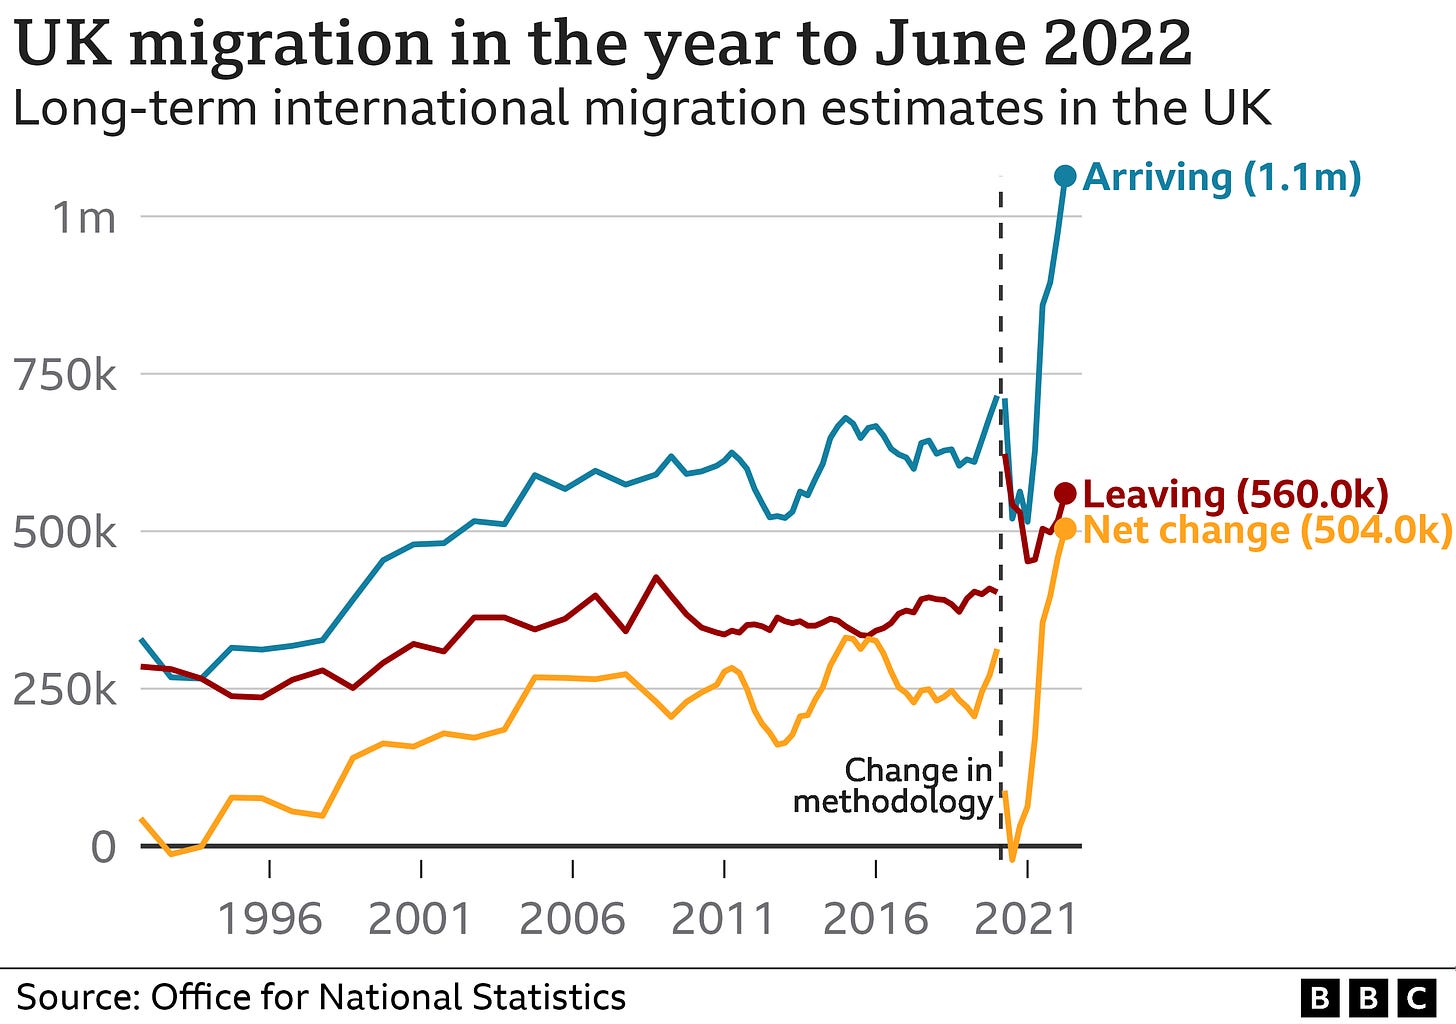 UK net migration hits all-time record at 504,000 - BBC News